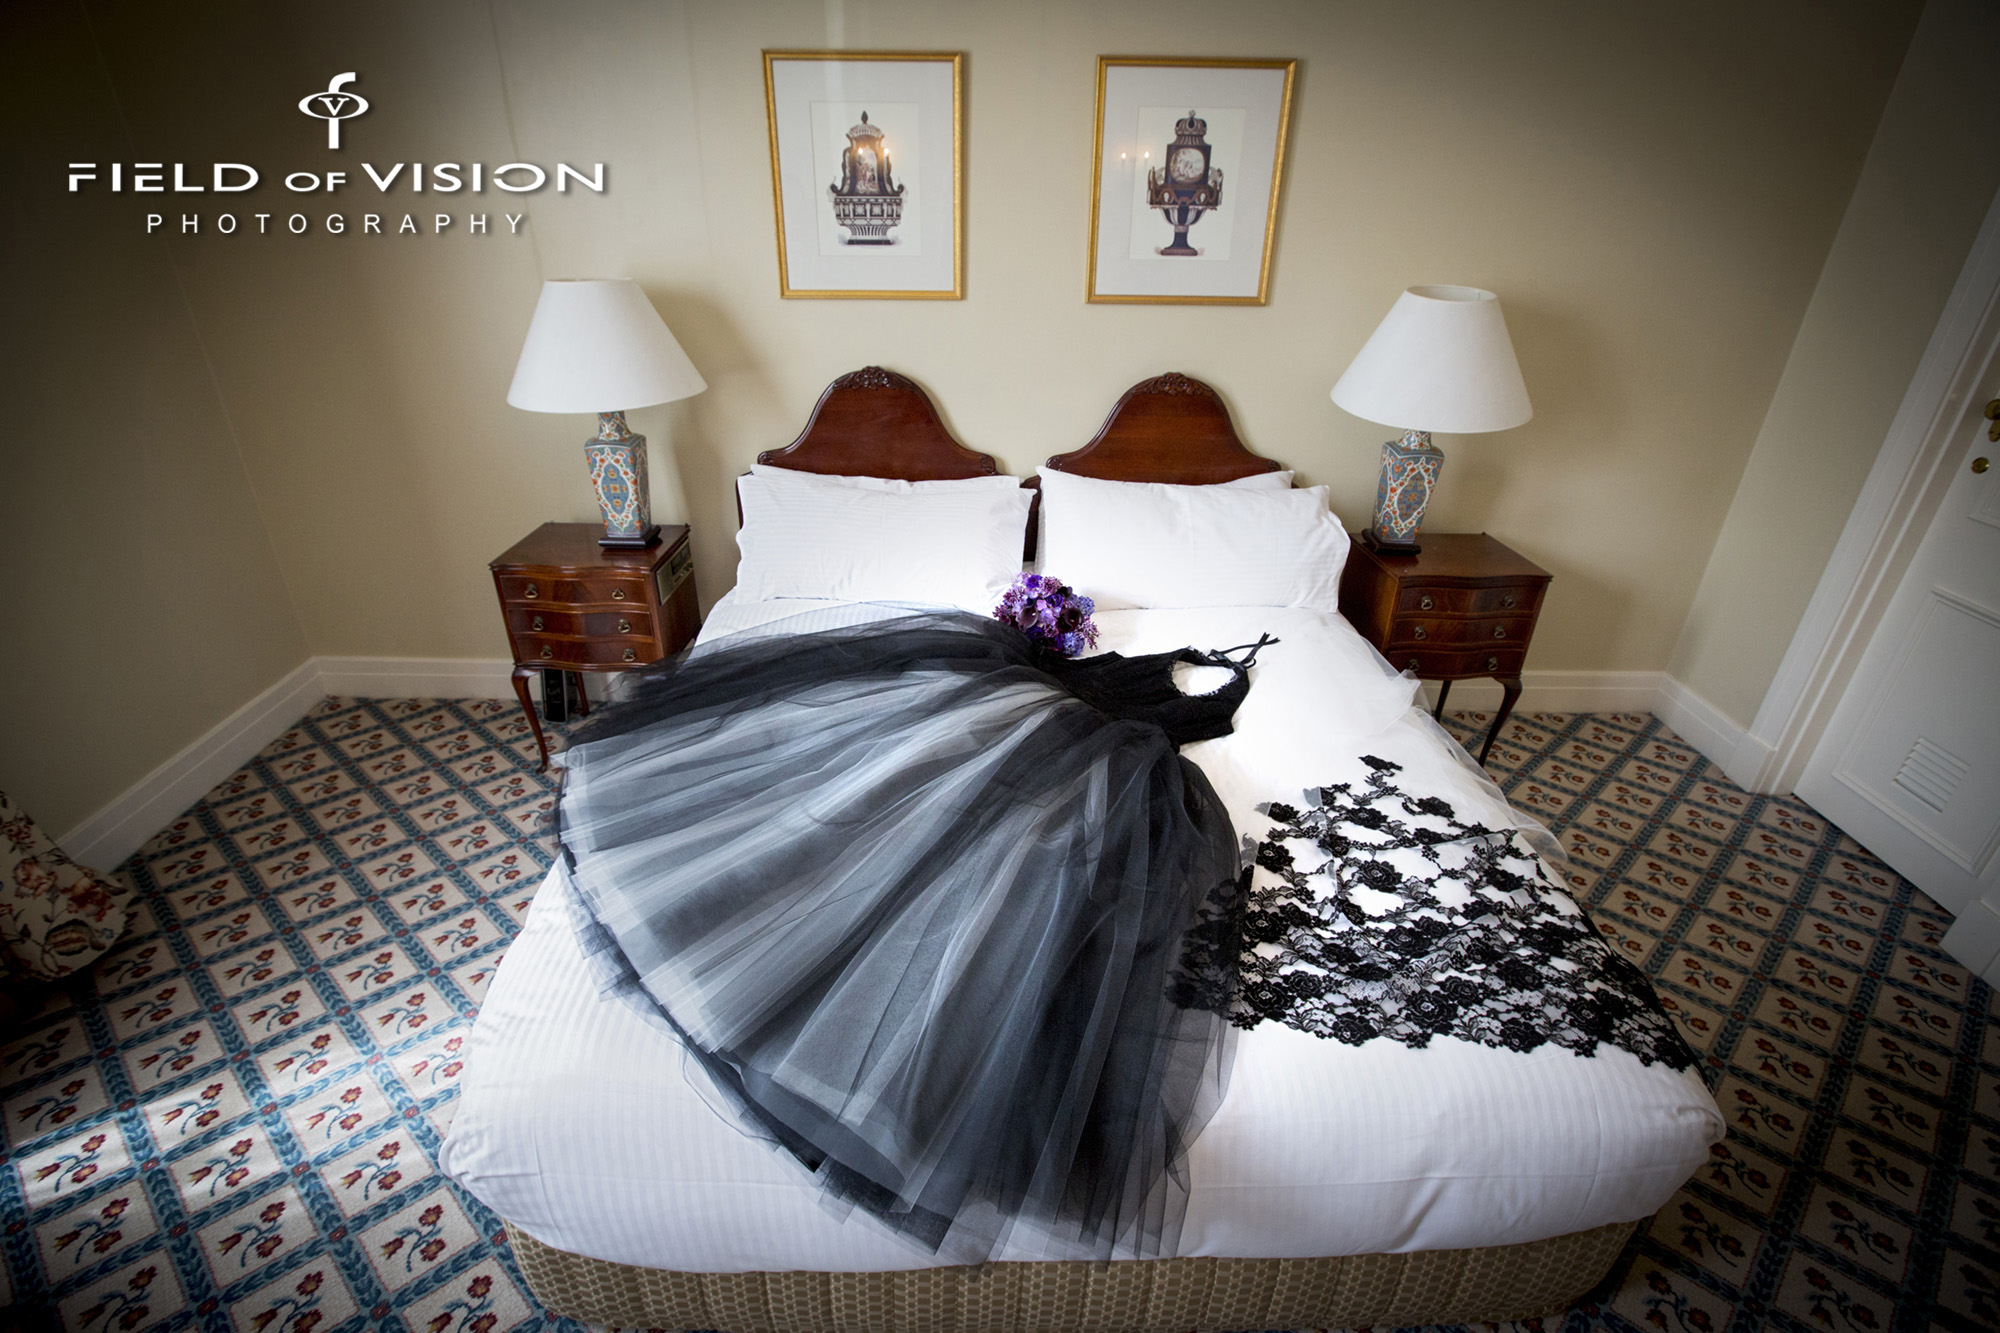 Vanyanis gothic wedding gown and lace veil on bed © Field of Vision